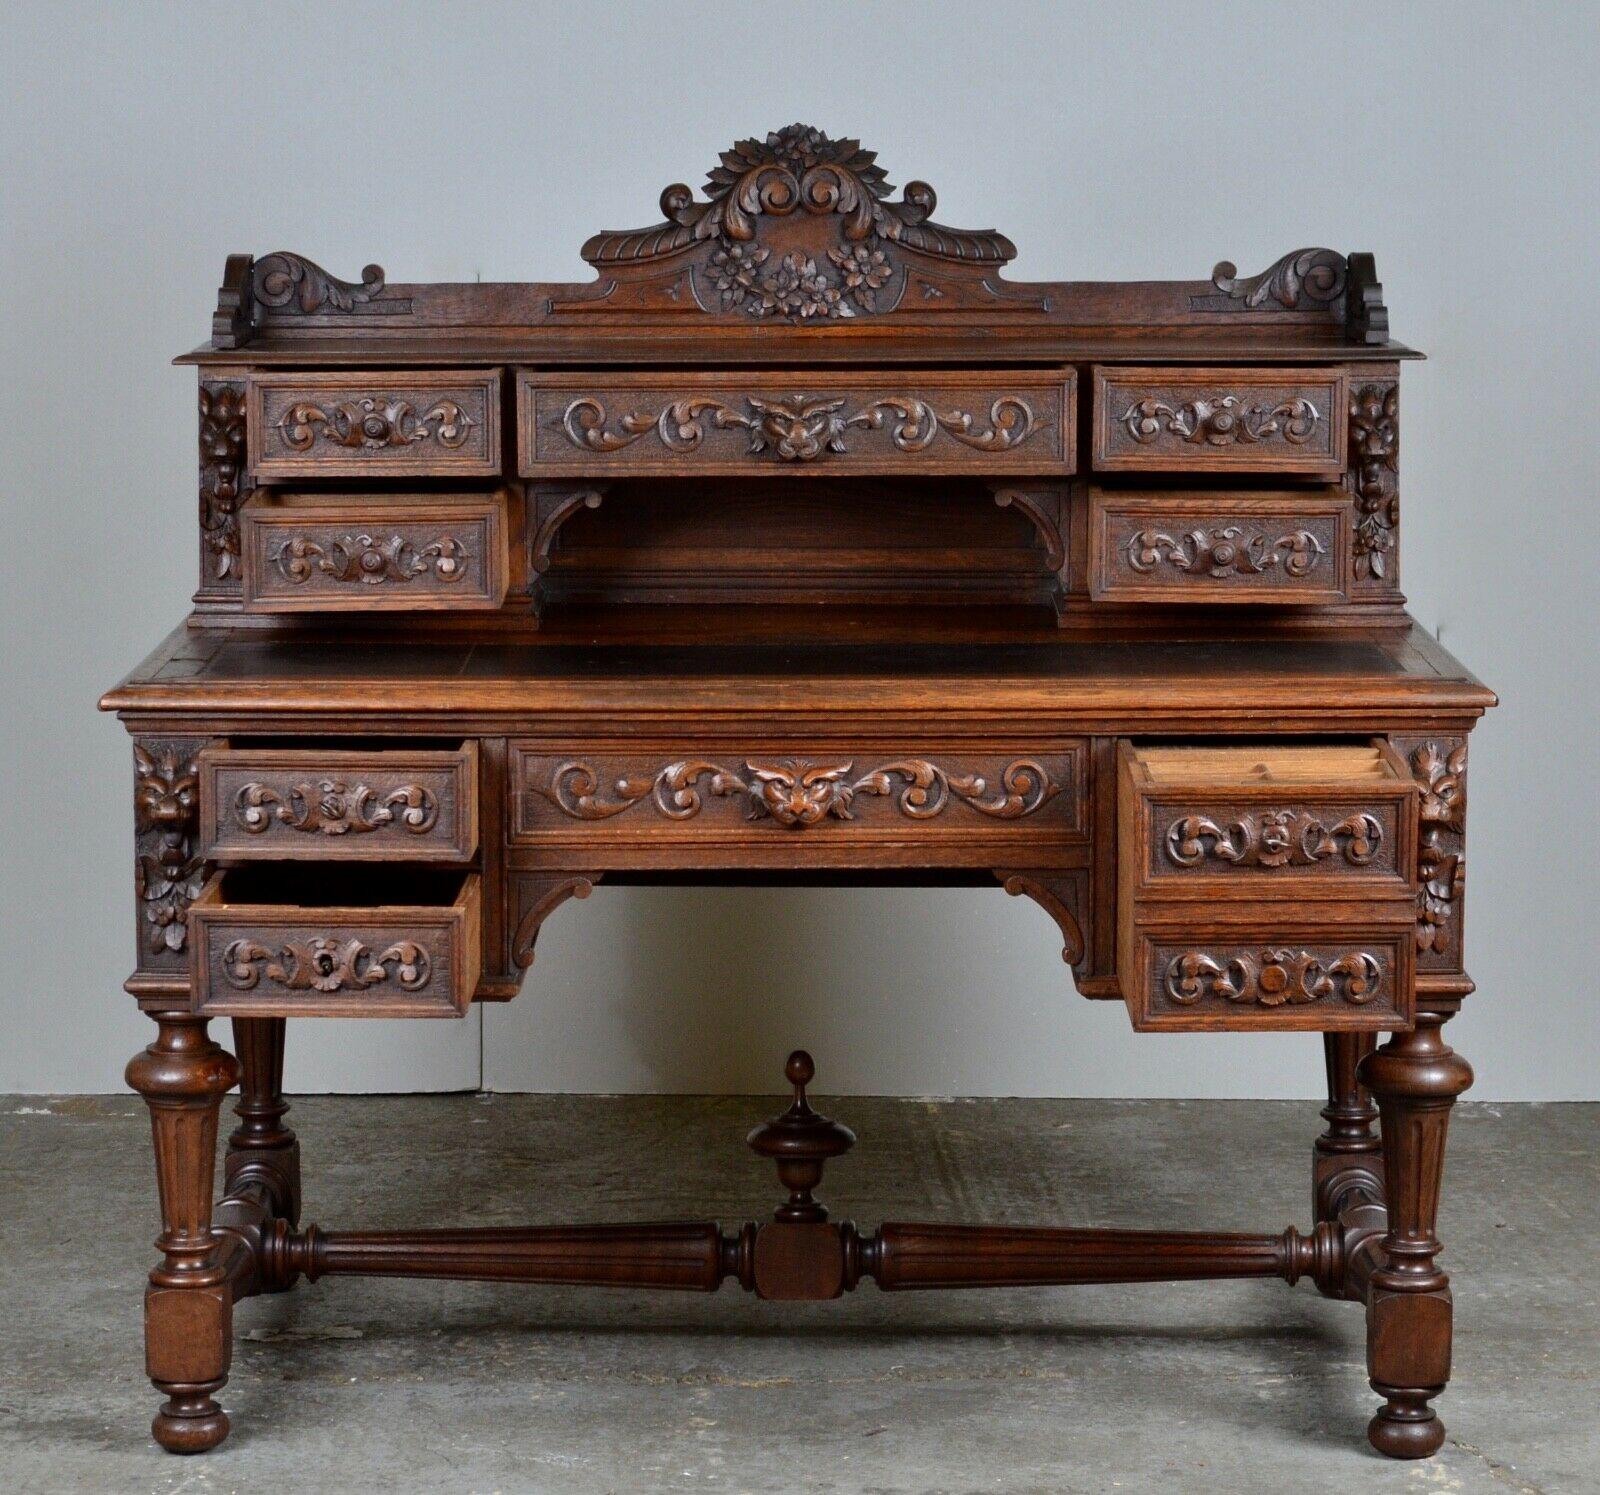 circa 1880 George III Style Carved Solid Oak Chest, Green Man Writing Desk  For Sale 4